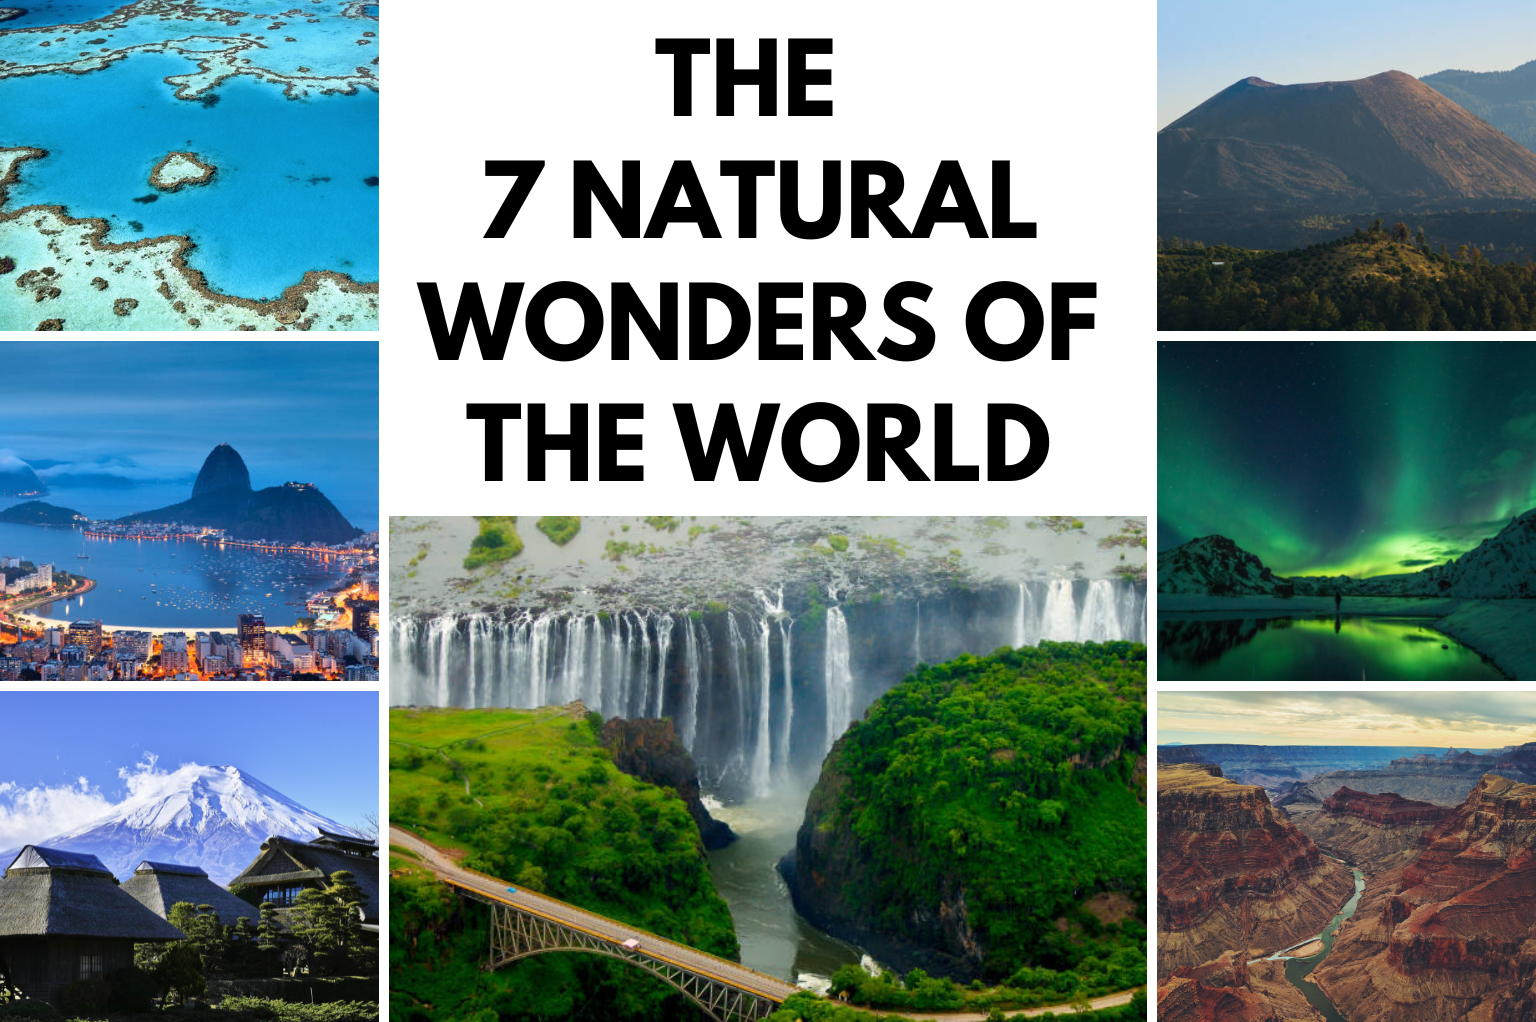 What are the 7 natural wonders of the world?